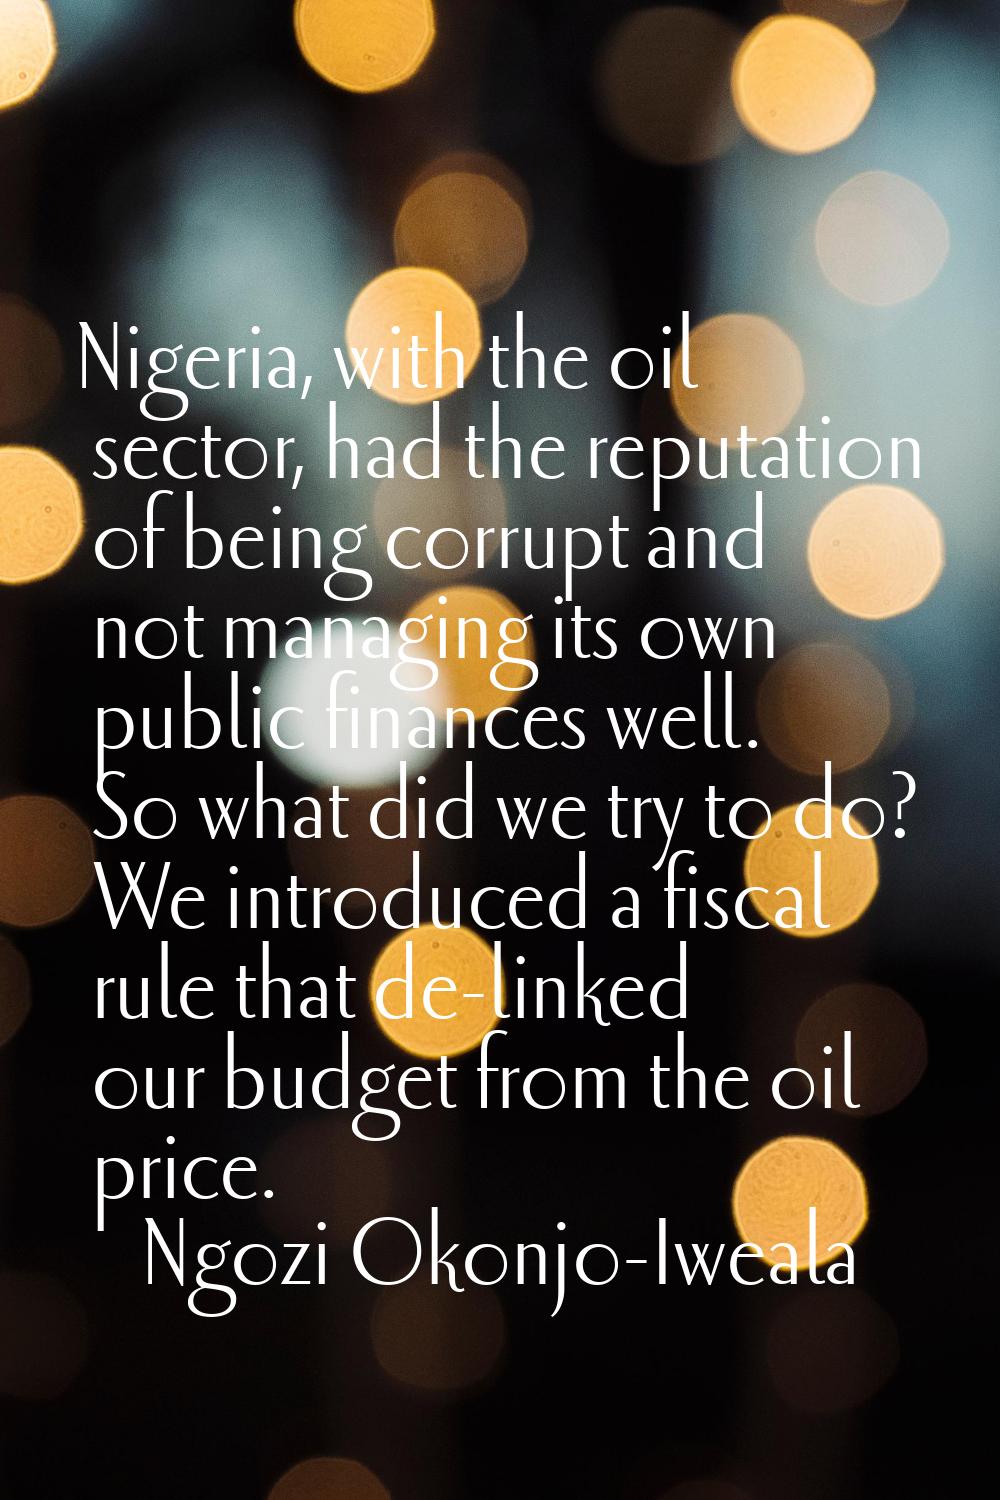 Nigeria, with the oil sector, had the reputation of being corrupt and not managing its own public f